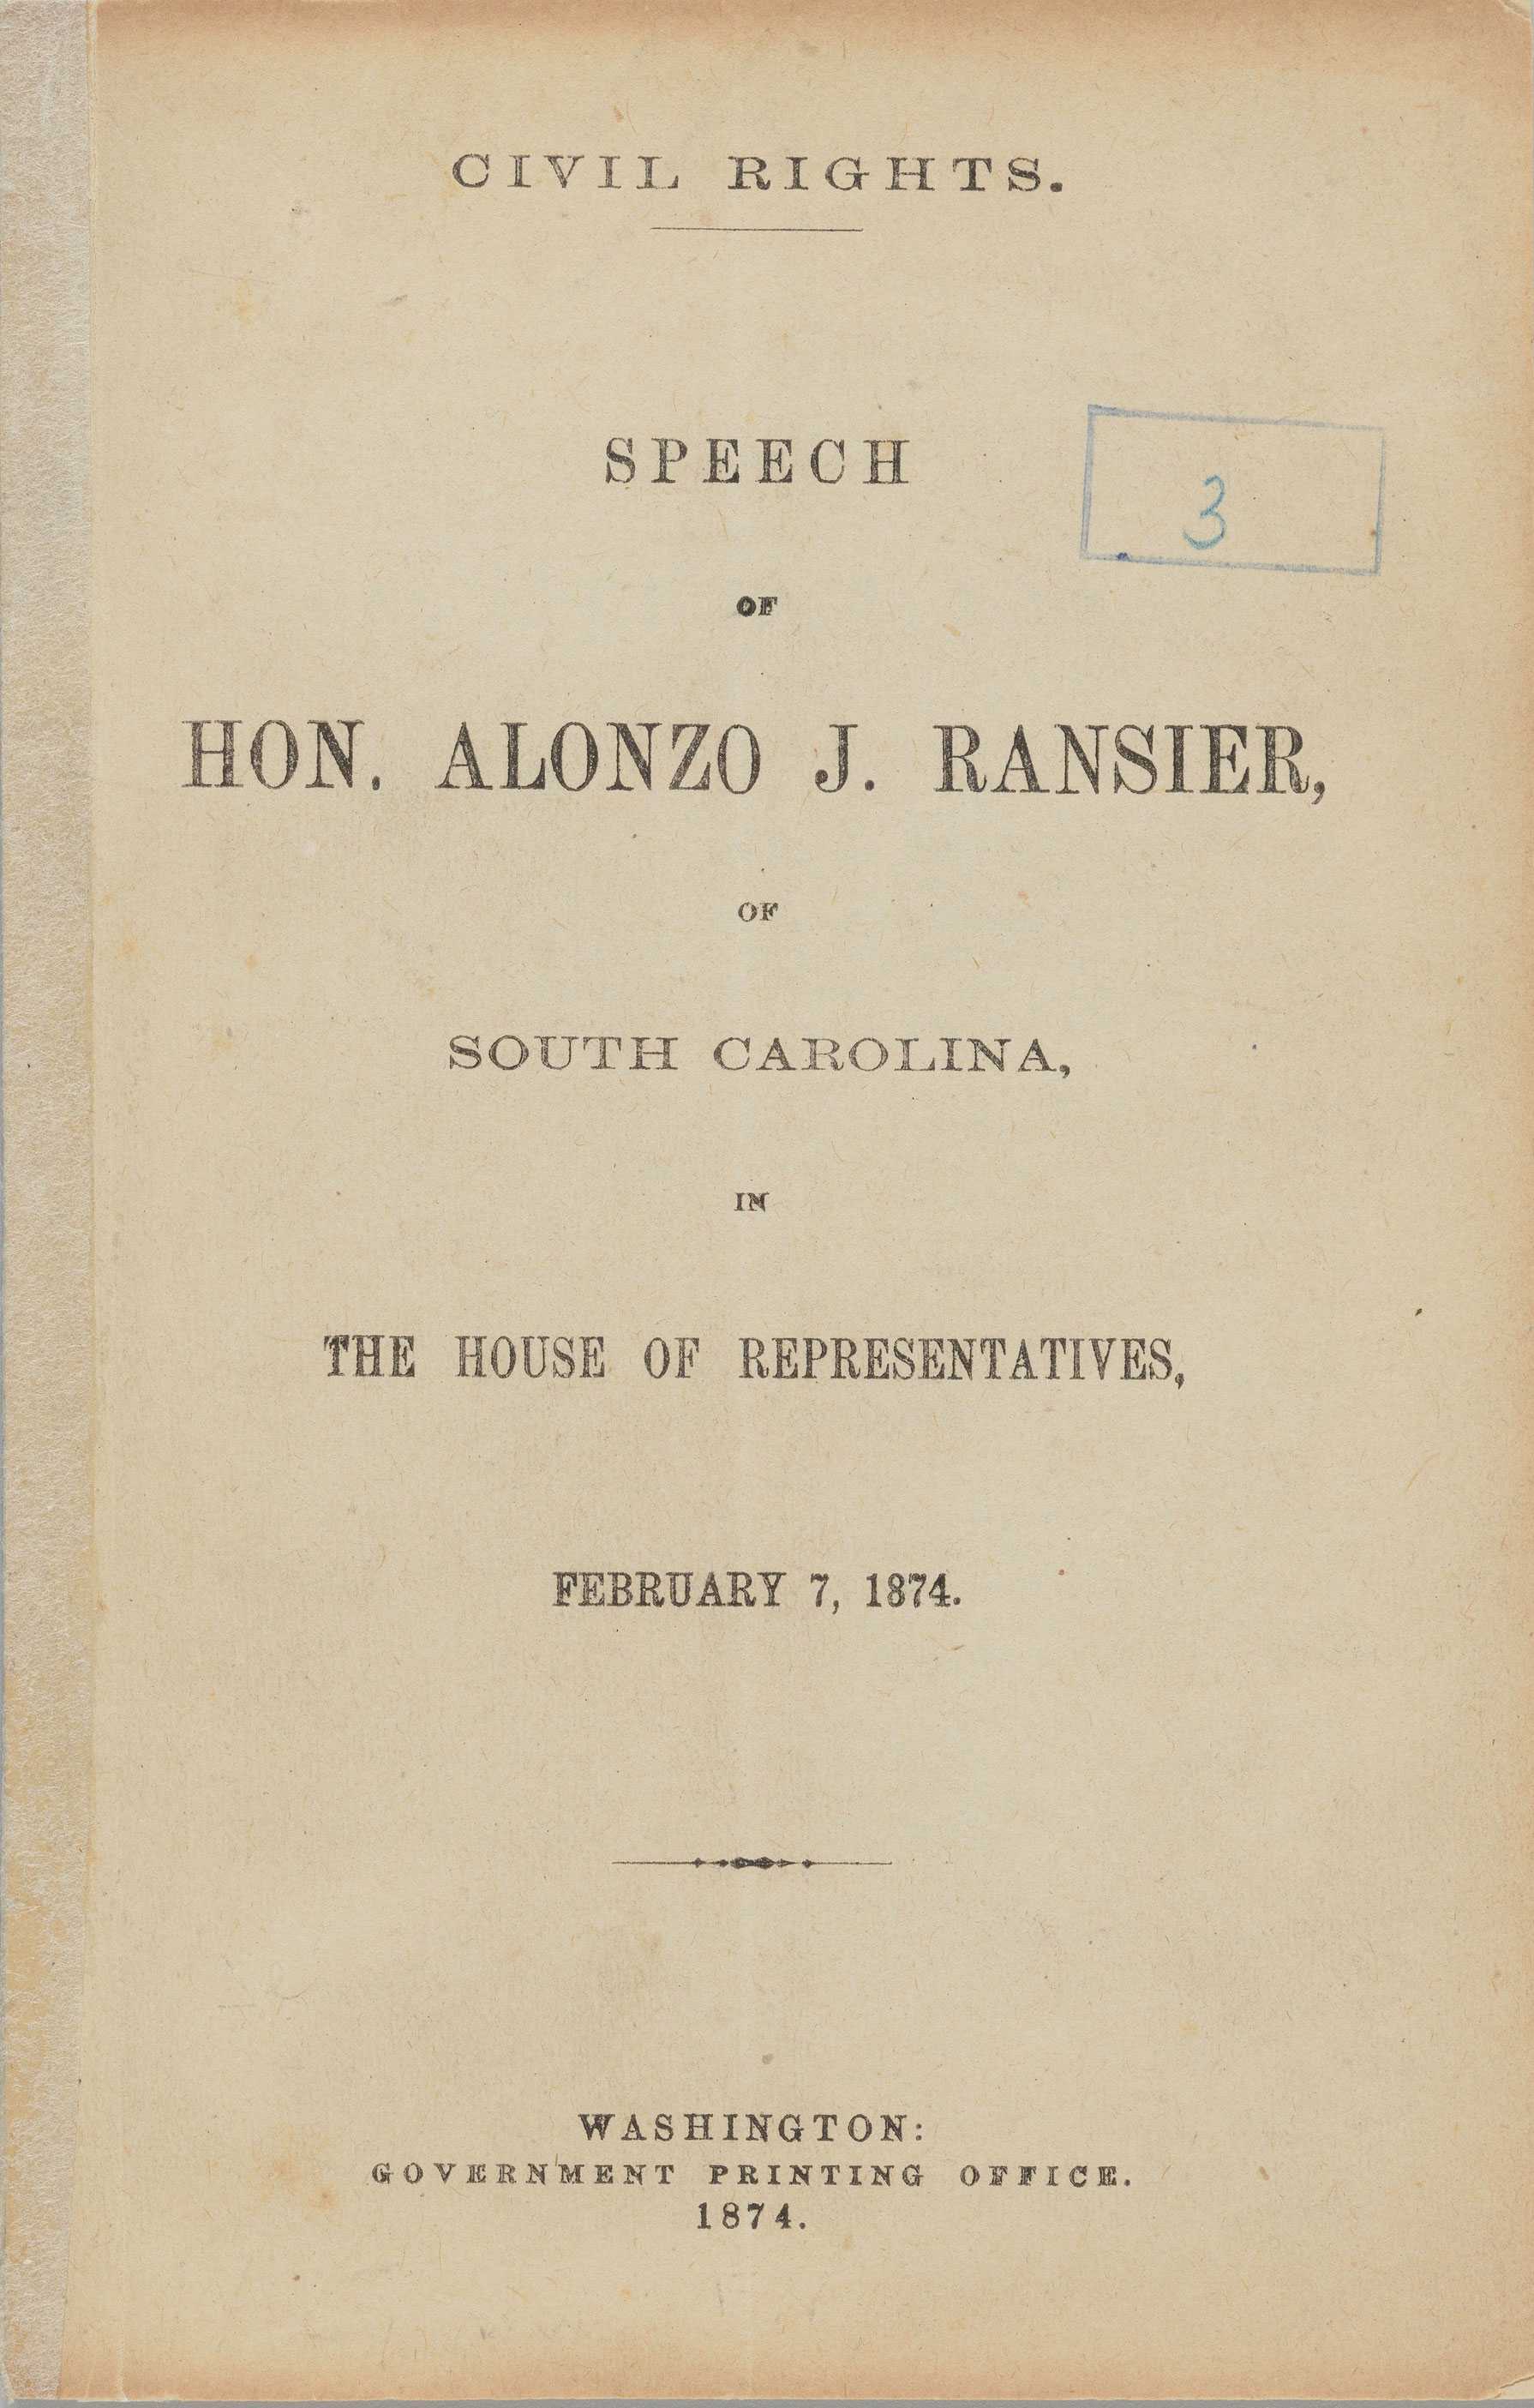 The title page of the speech by Hon. Alonzo J. Ransie of South Carolina. It is dated February 7, 1874.